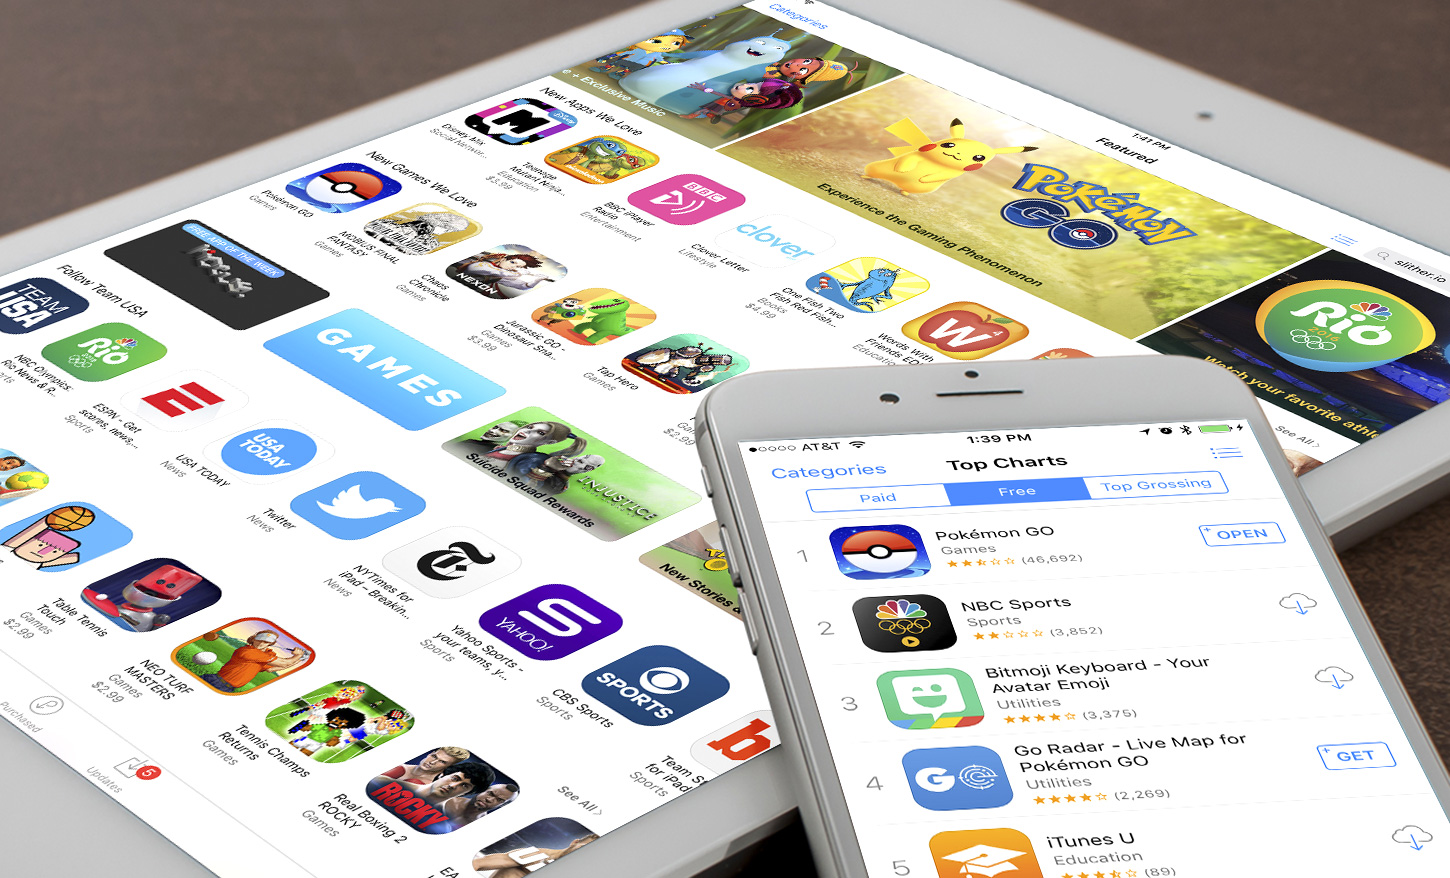 Over 5m Apps on the App Store by 2020